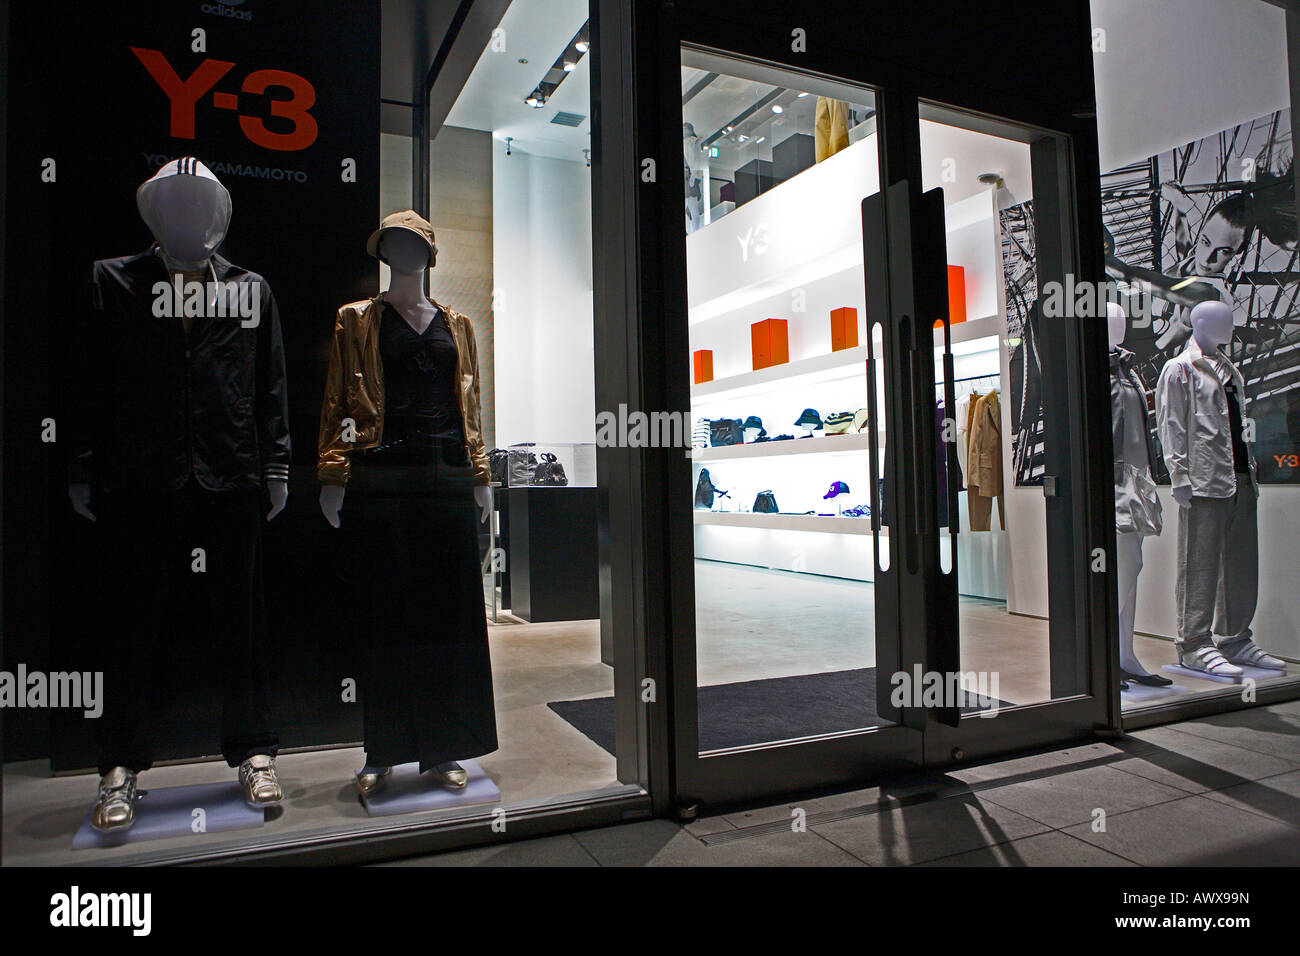 Y3 Store in Aoyama Stock Photo - Alamy